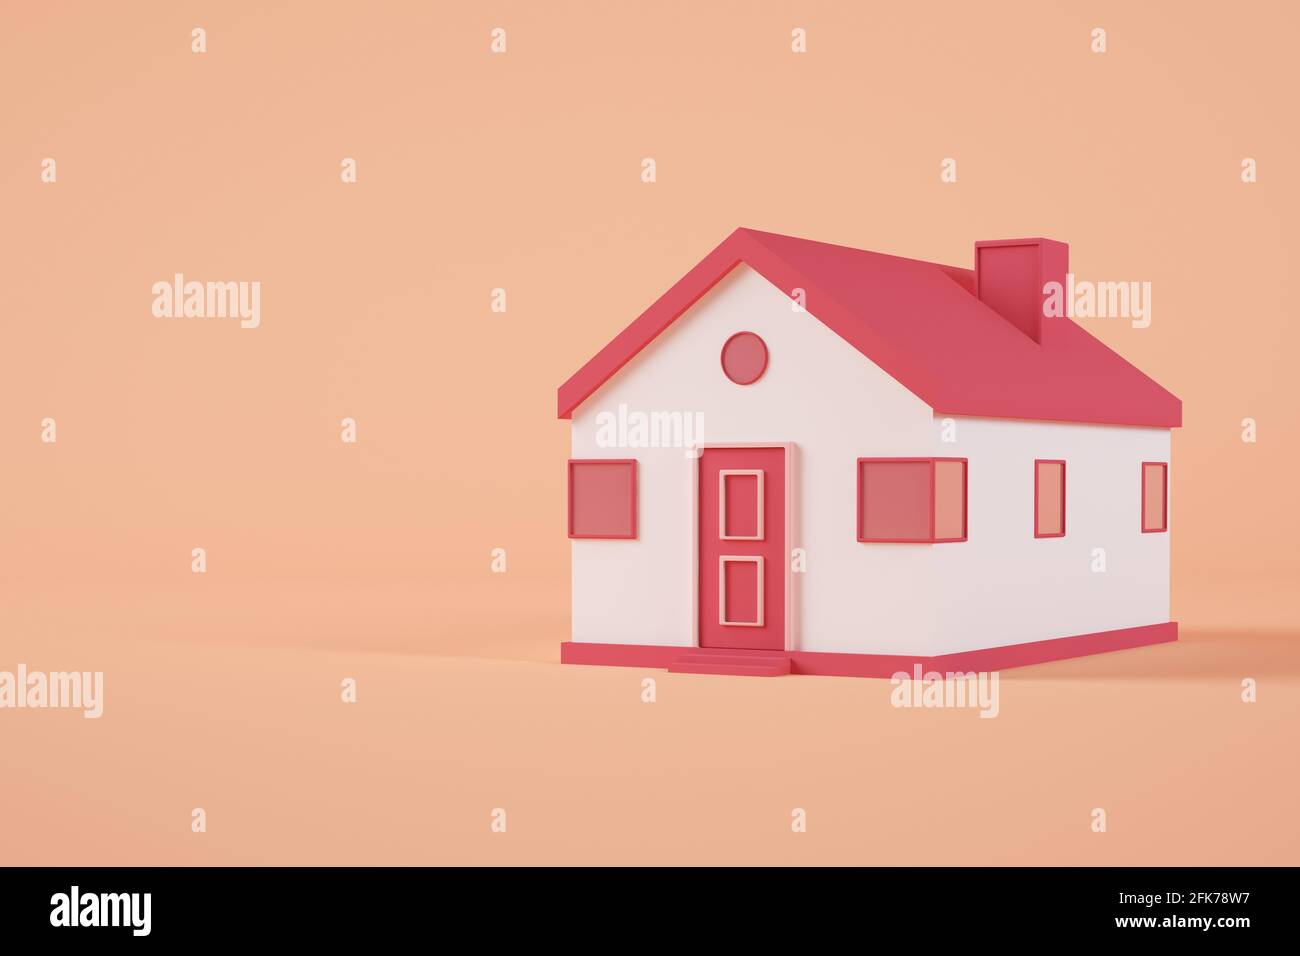 3d rendering of a pink house Stock Photo